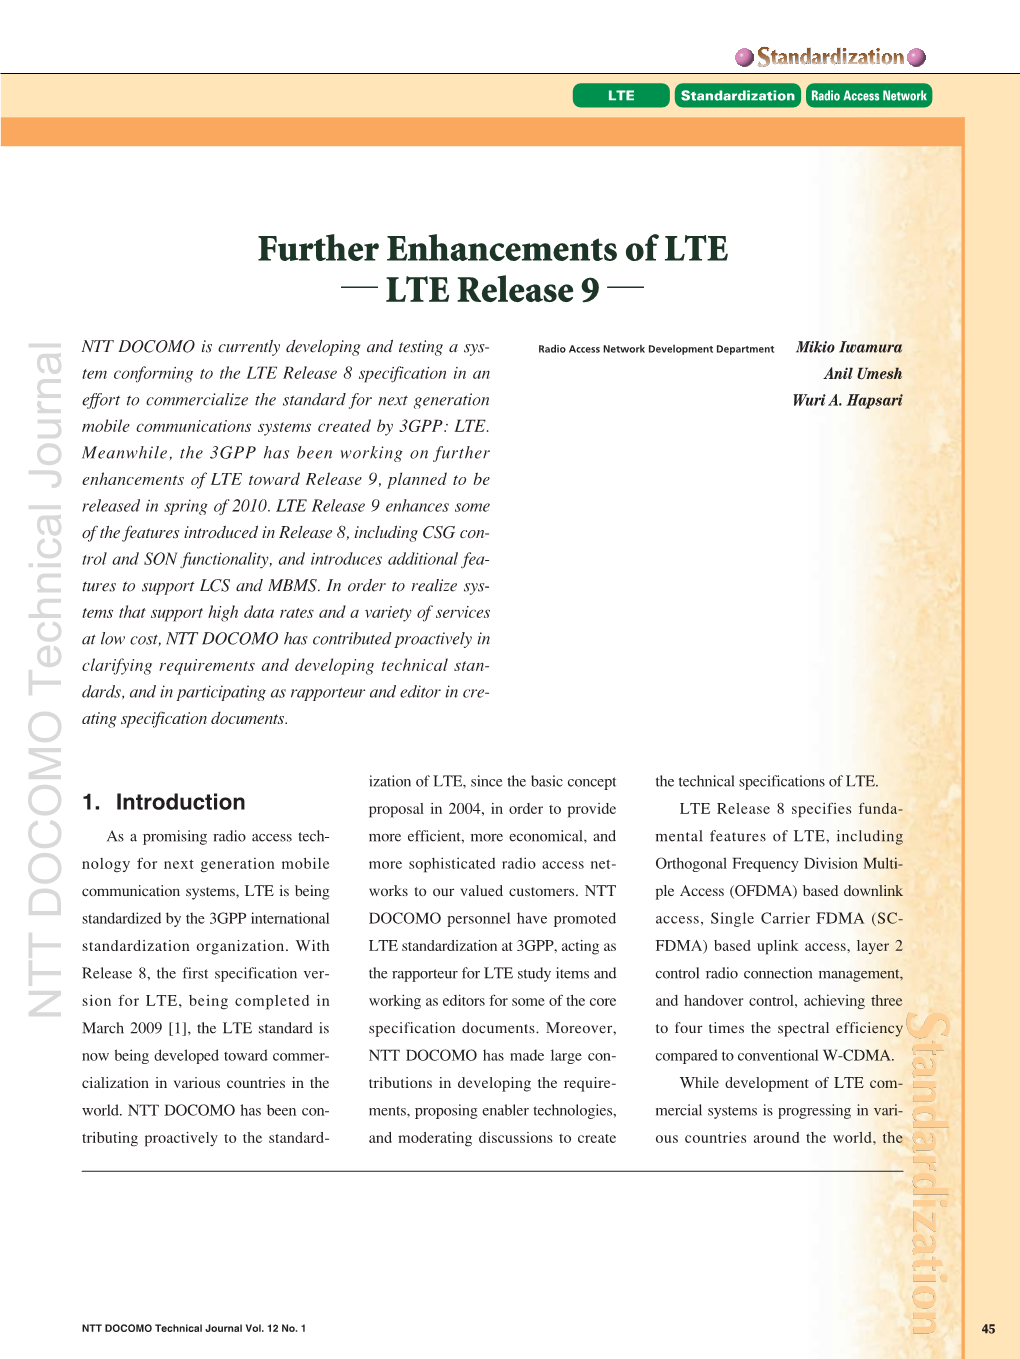 Further Enhancements of LTE -LTE Release 9